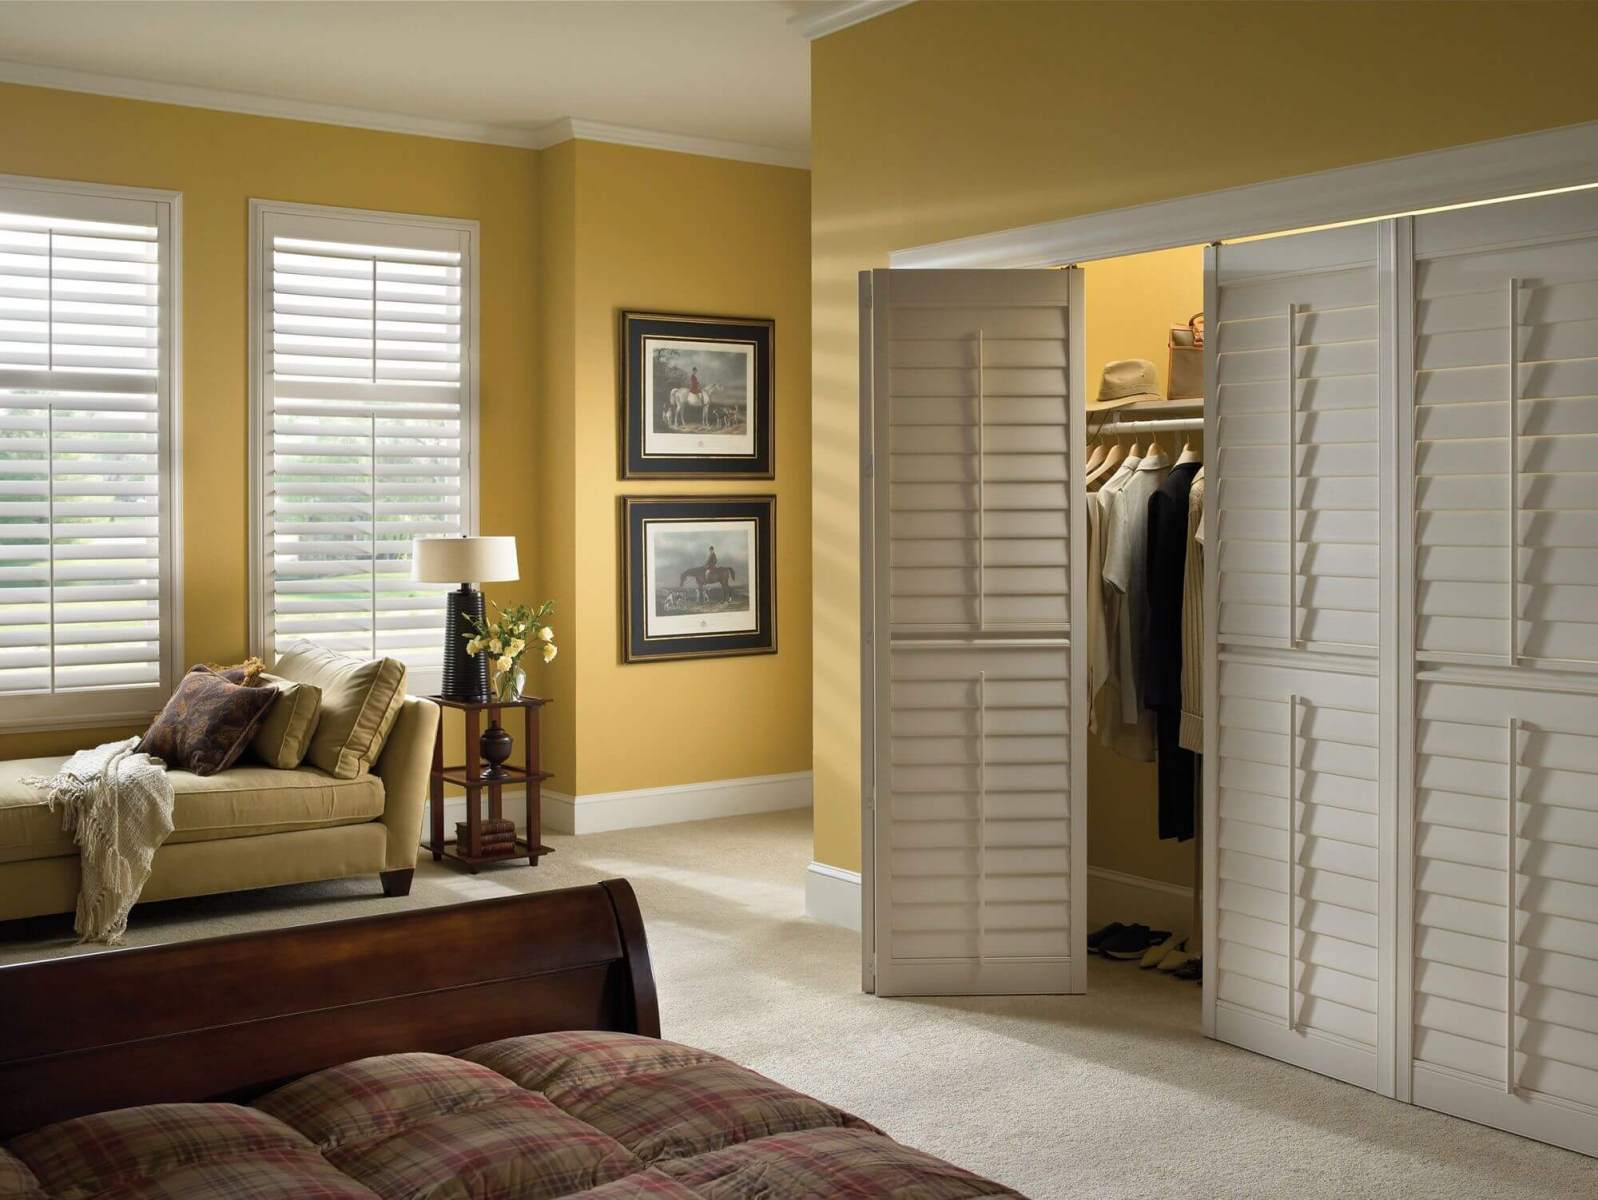 Timberblind Holly Springs NC Window Blinds Shades And Shutters